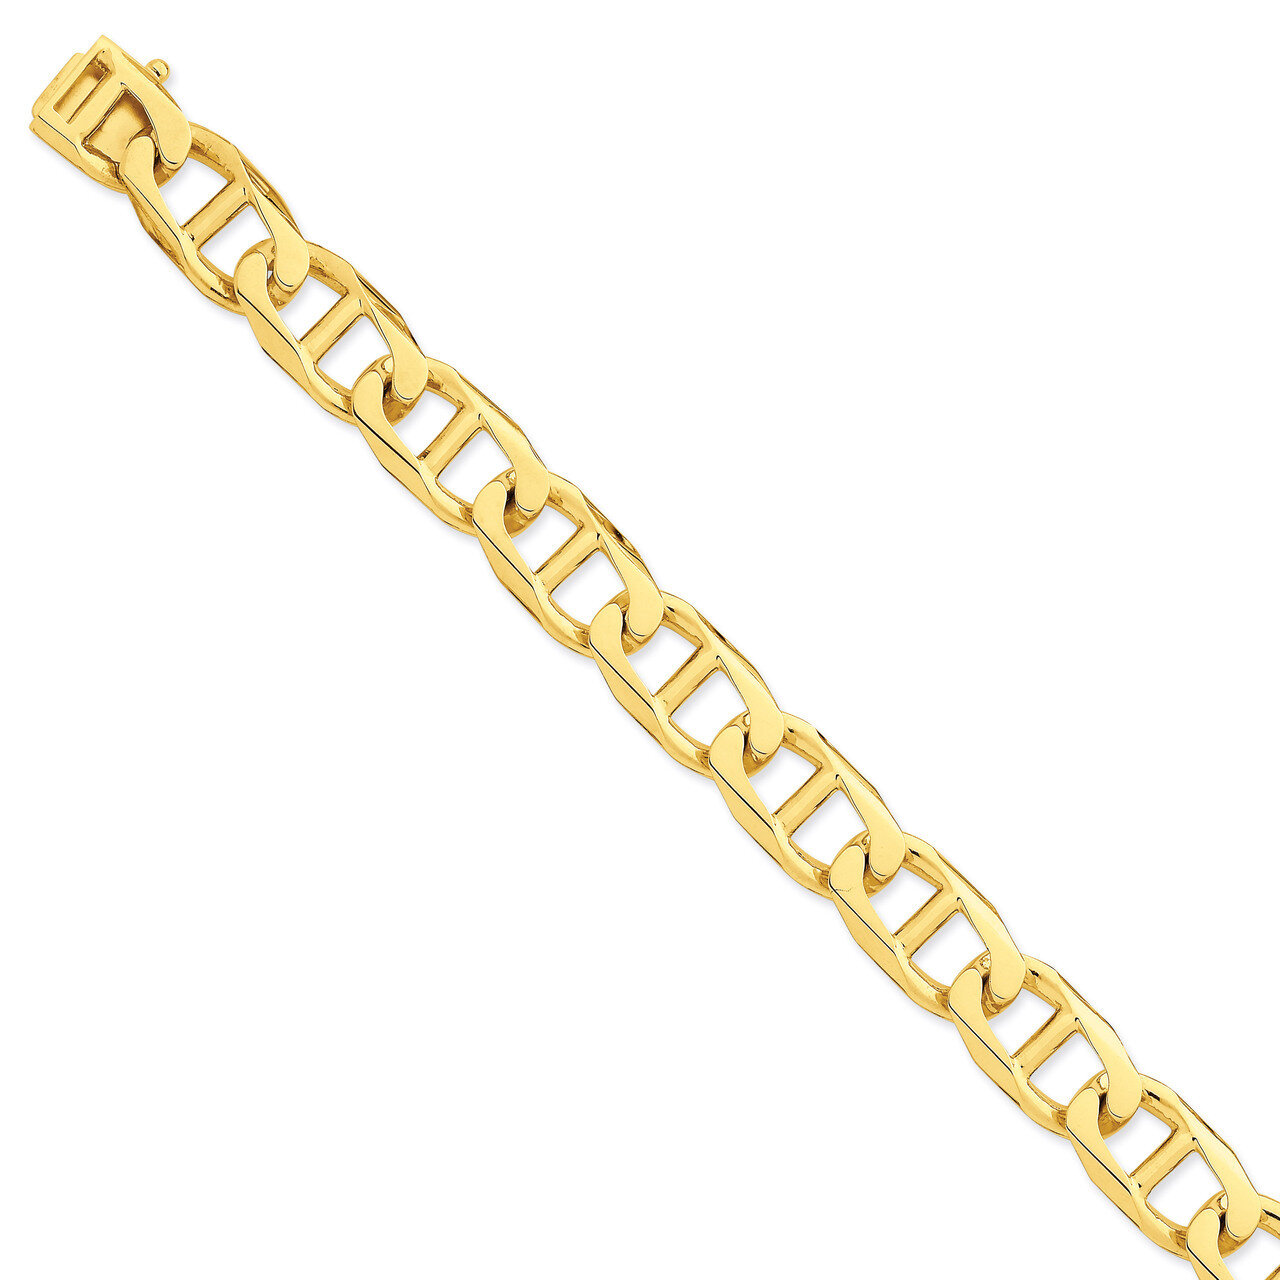 13mm Hand-polished Anchor Link Chain 8 Inch 14k Gold LK103-8